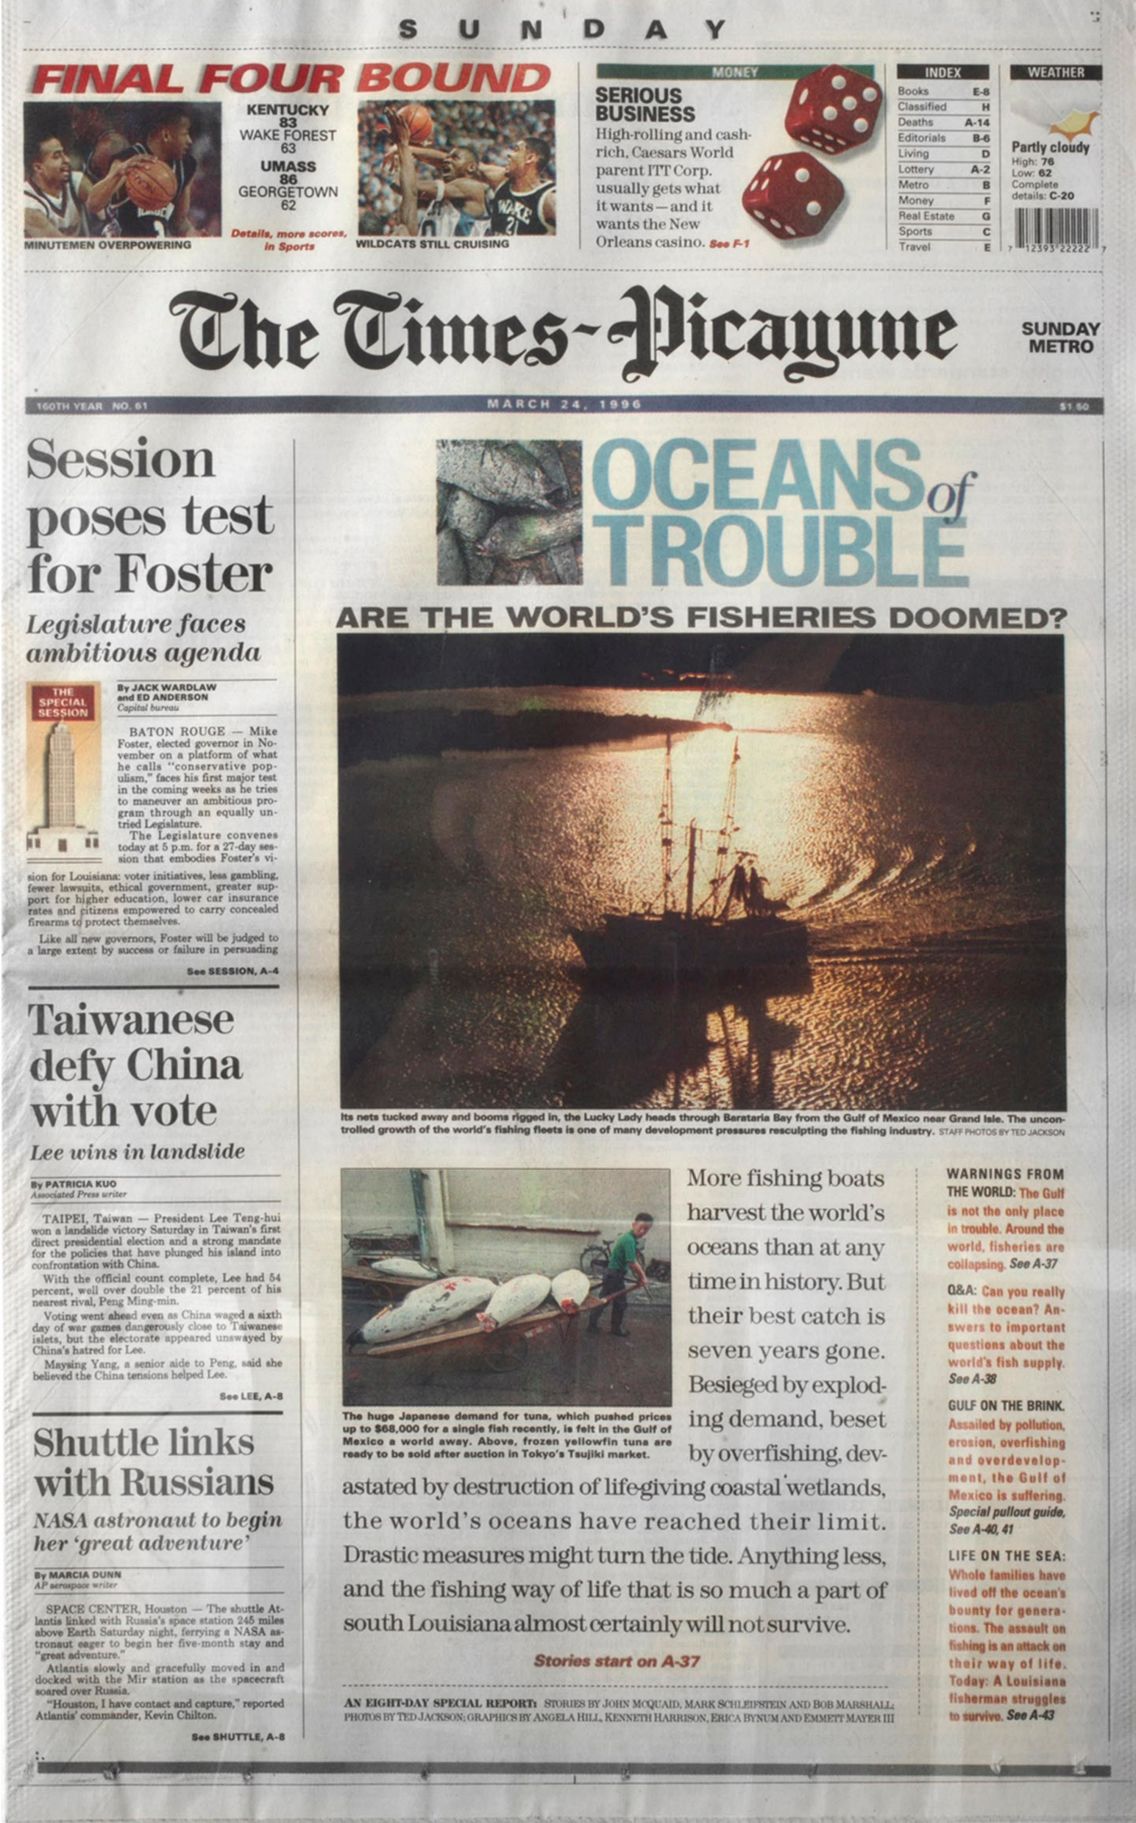 10b times picayune OceansOfTrouble 1996.pdf